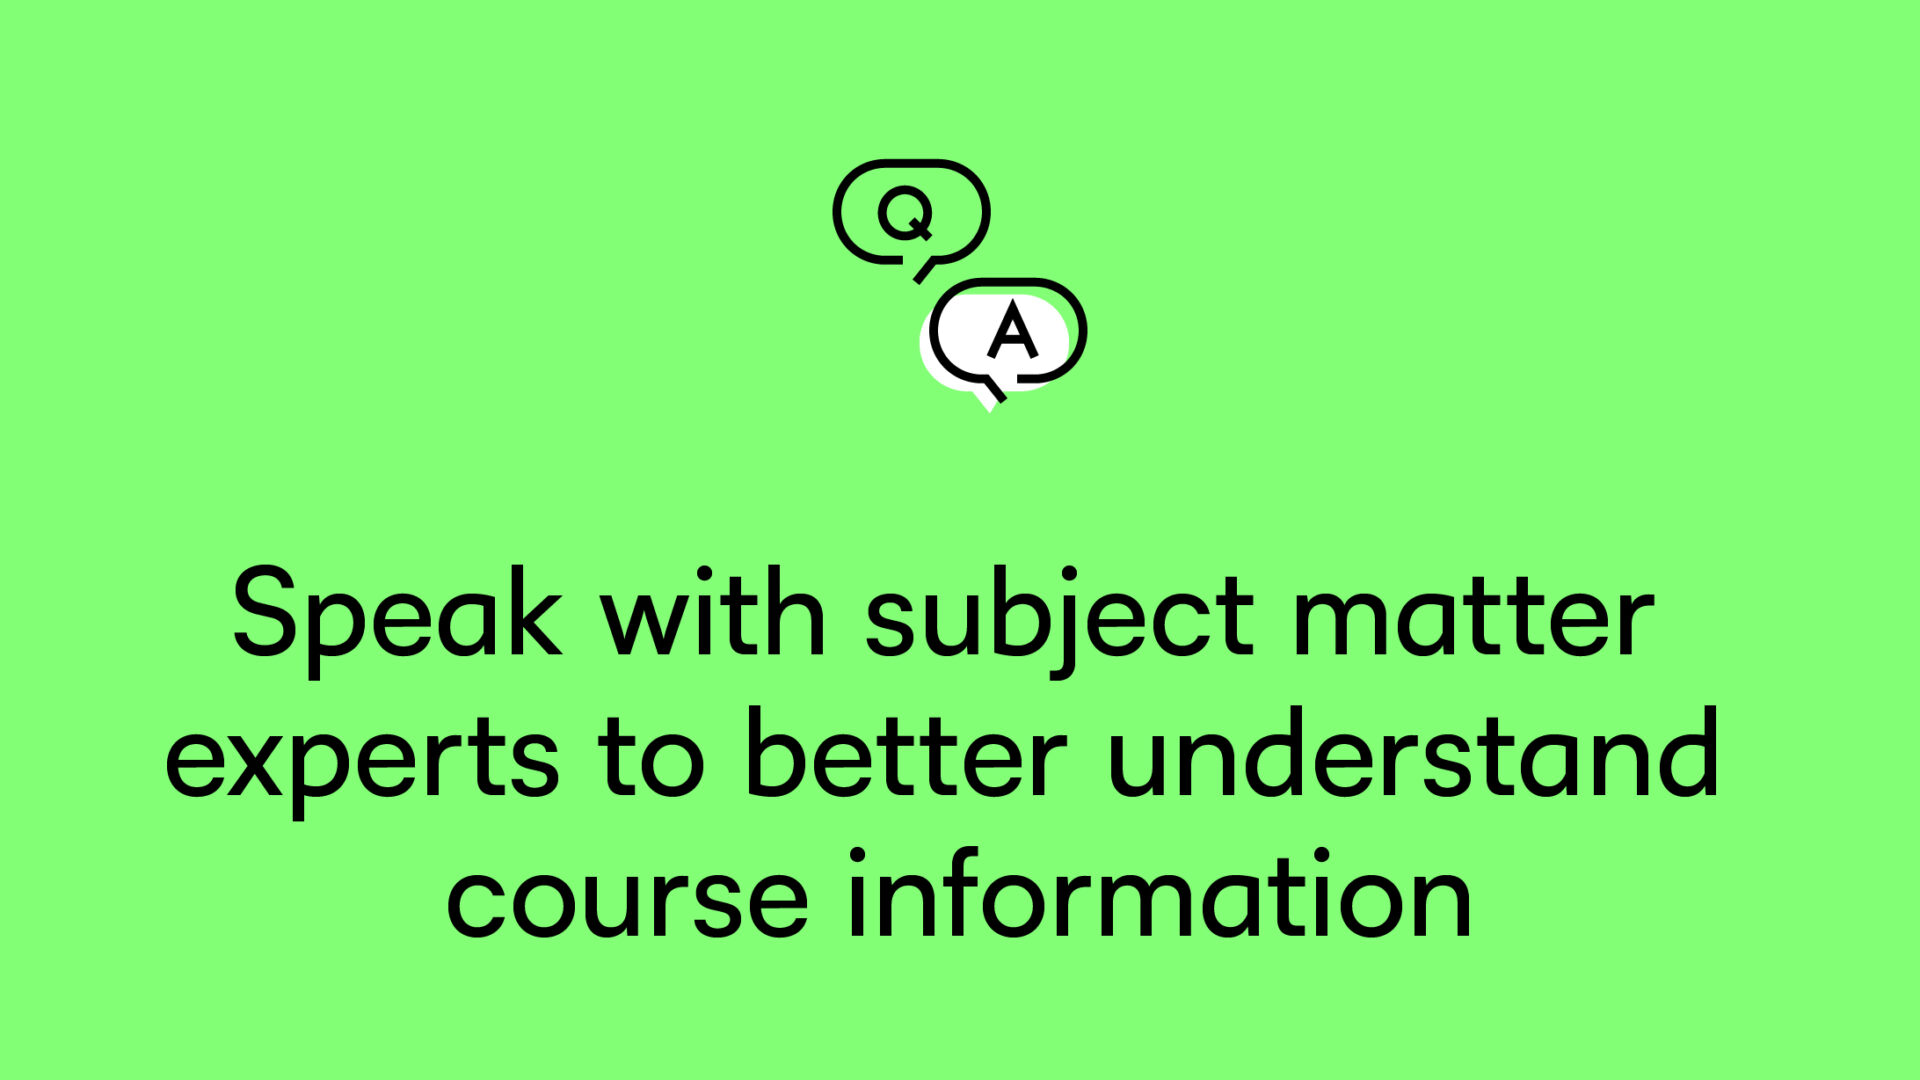 Speak with subject matter experts to better understand course information